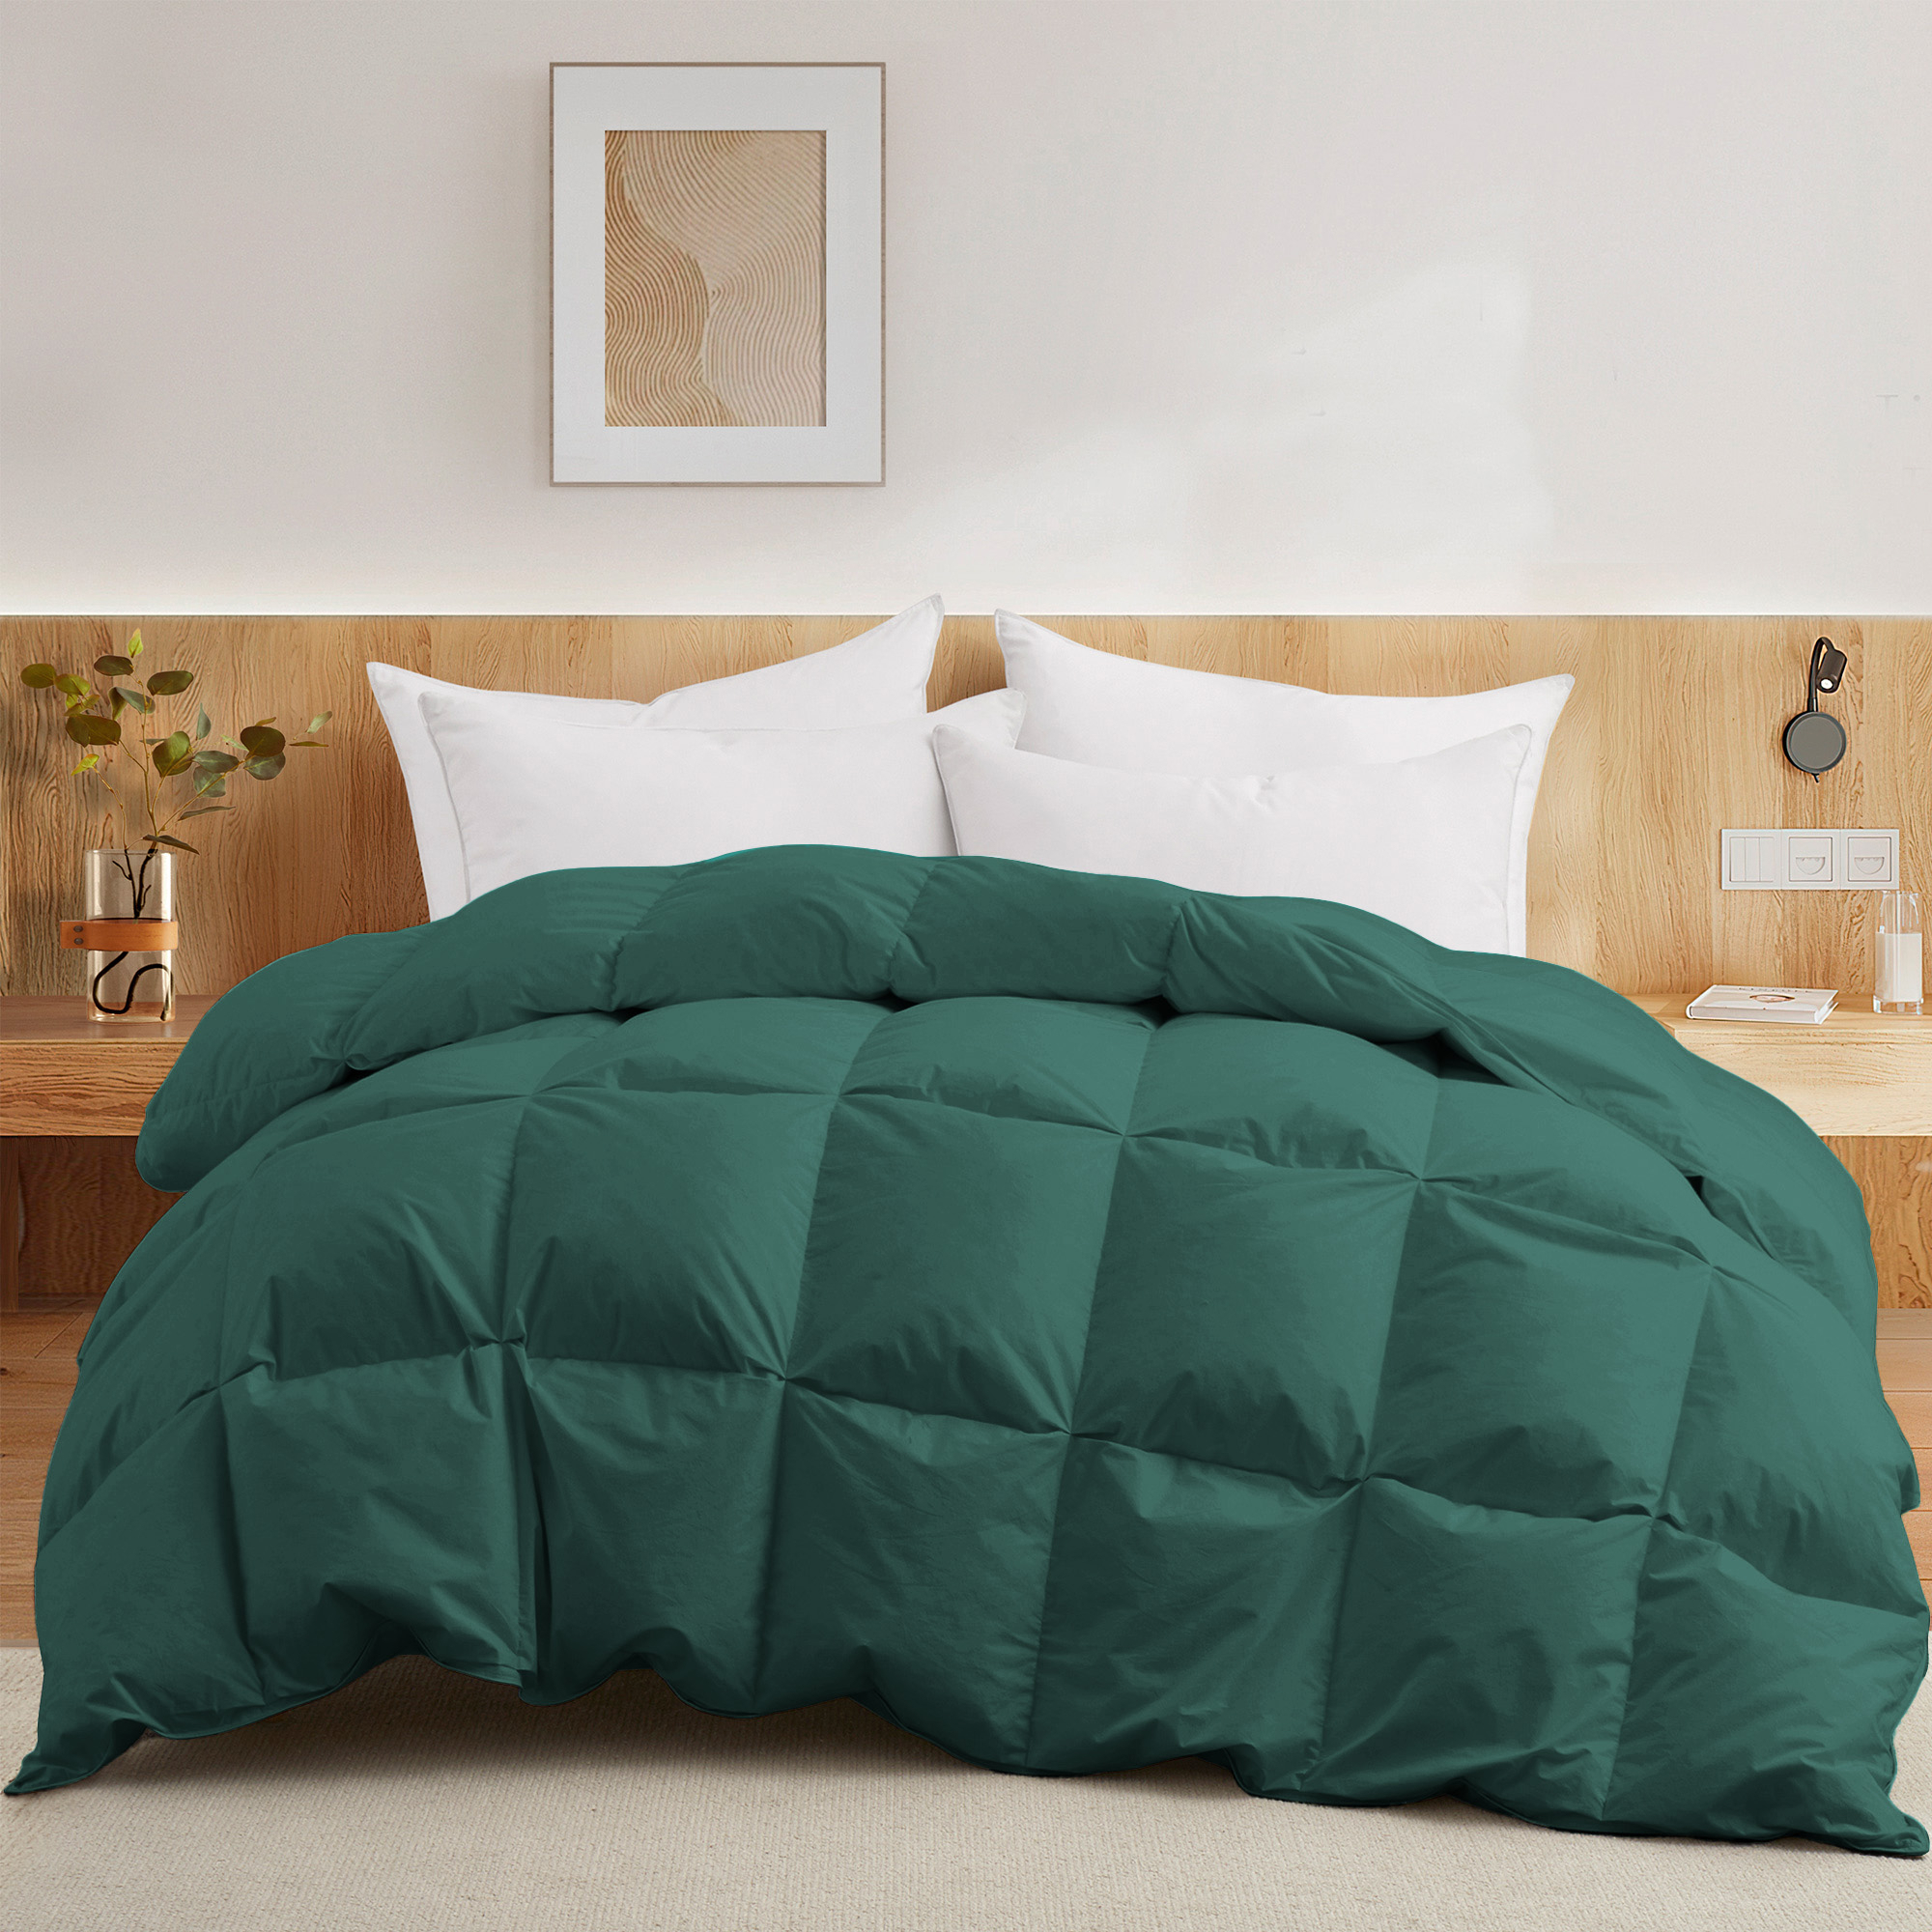 Premium Goose Feather And Down Duvet Insert -All Season Comforter With Breathable Cotton Cover - King-104*90